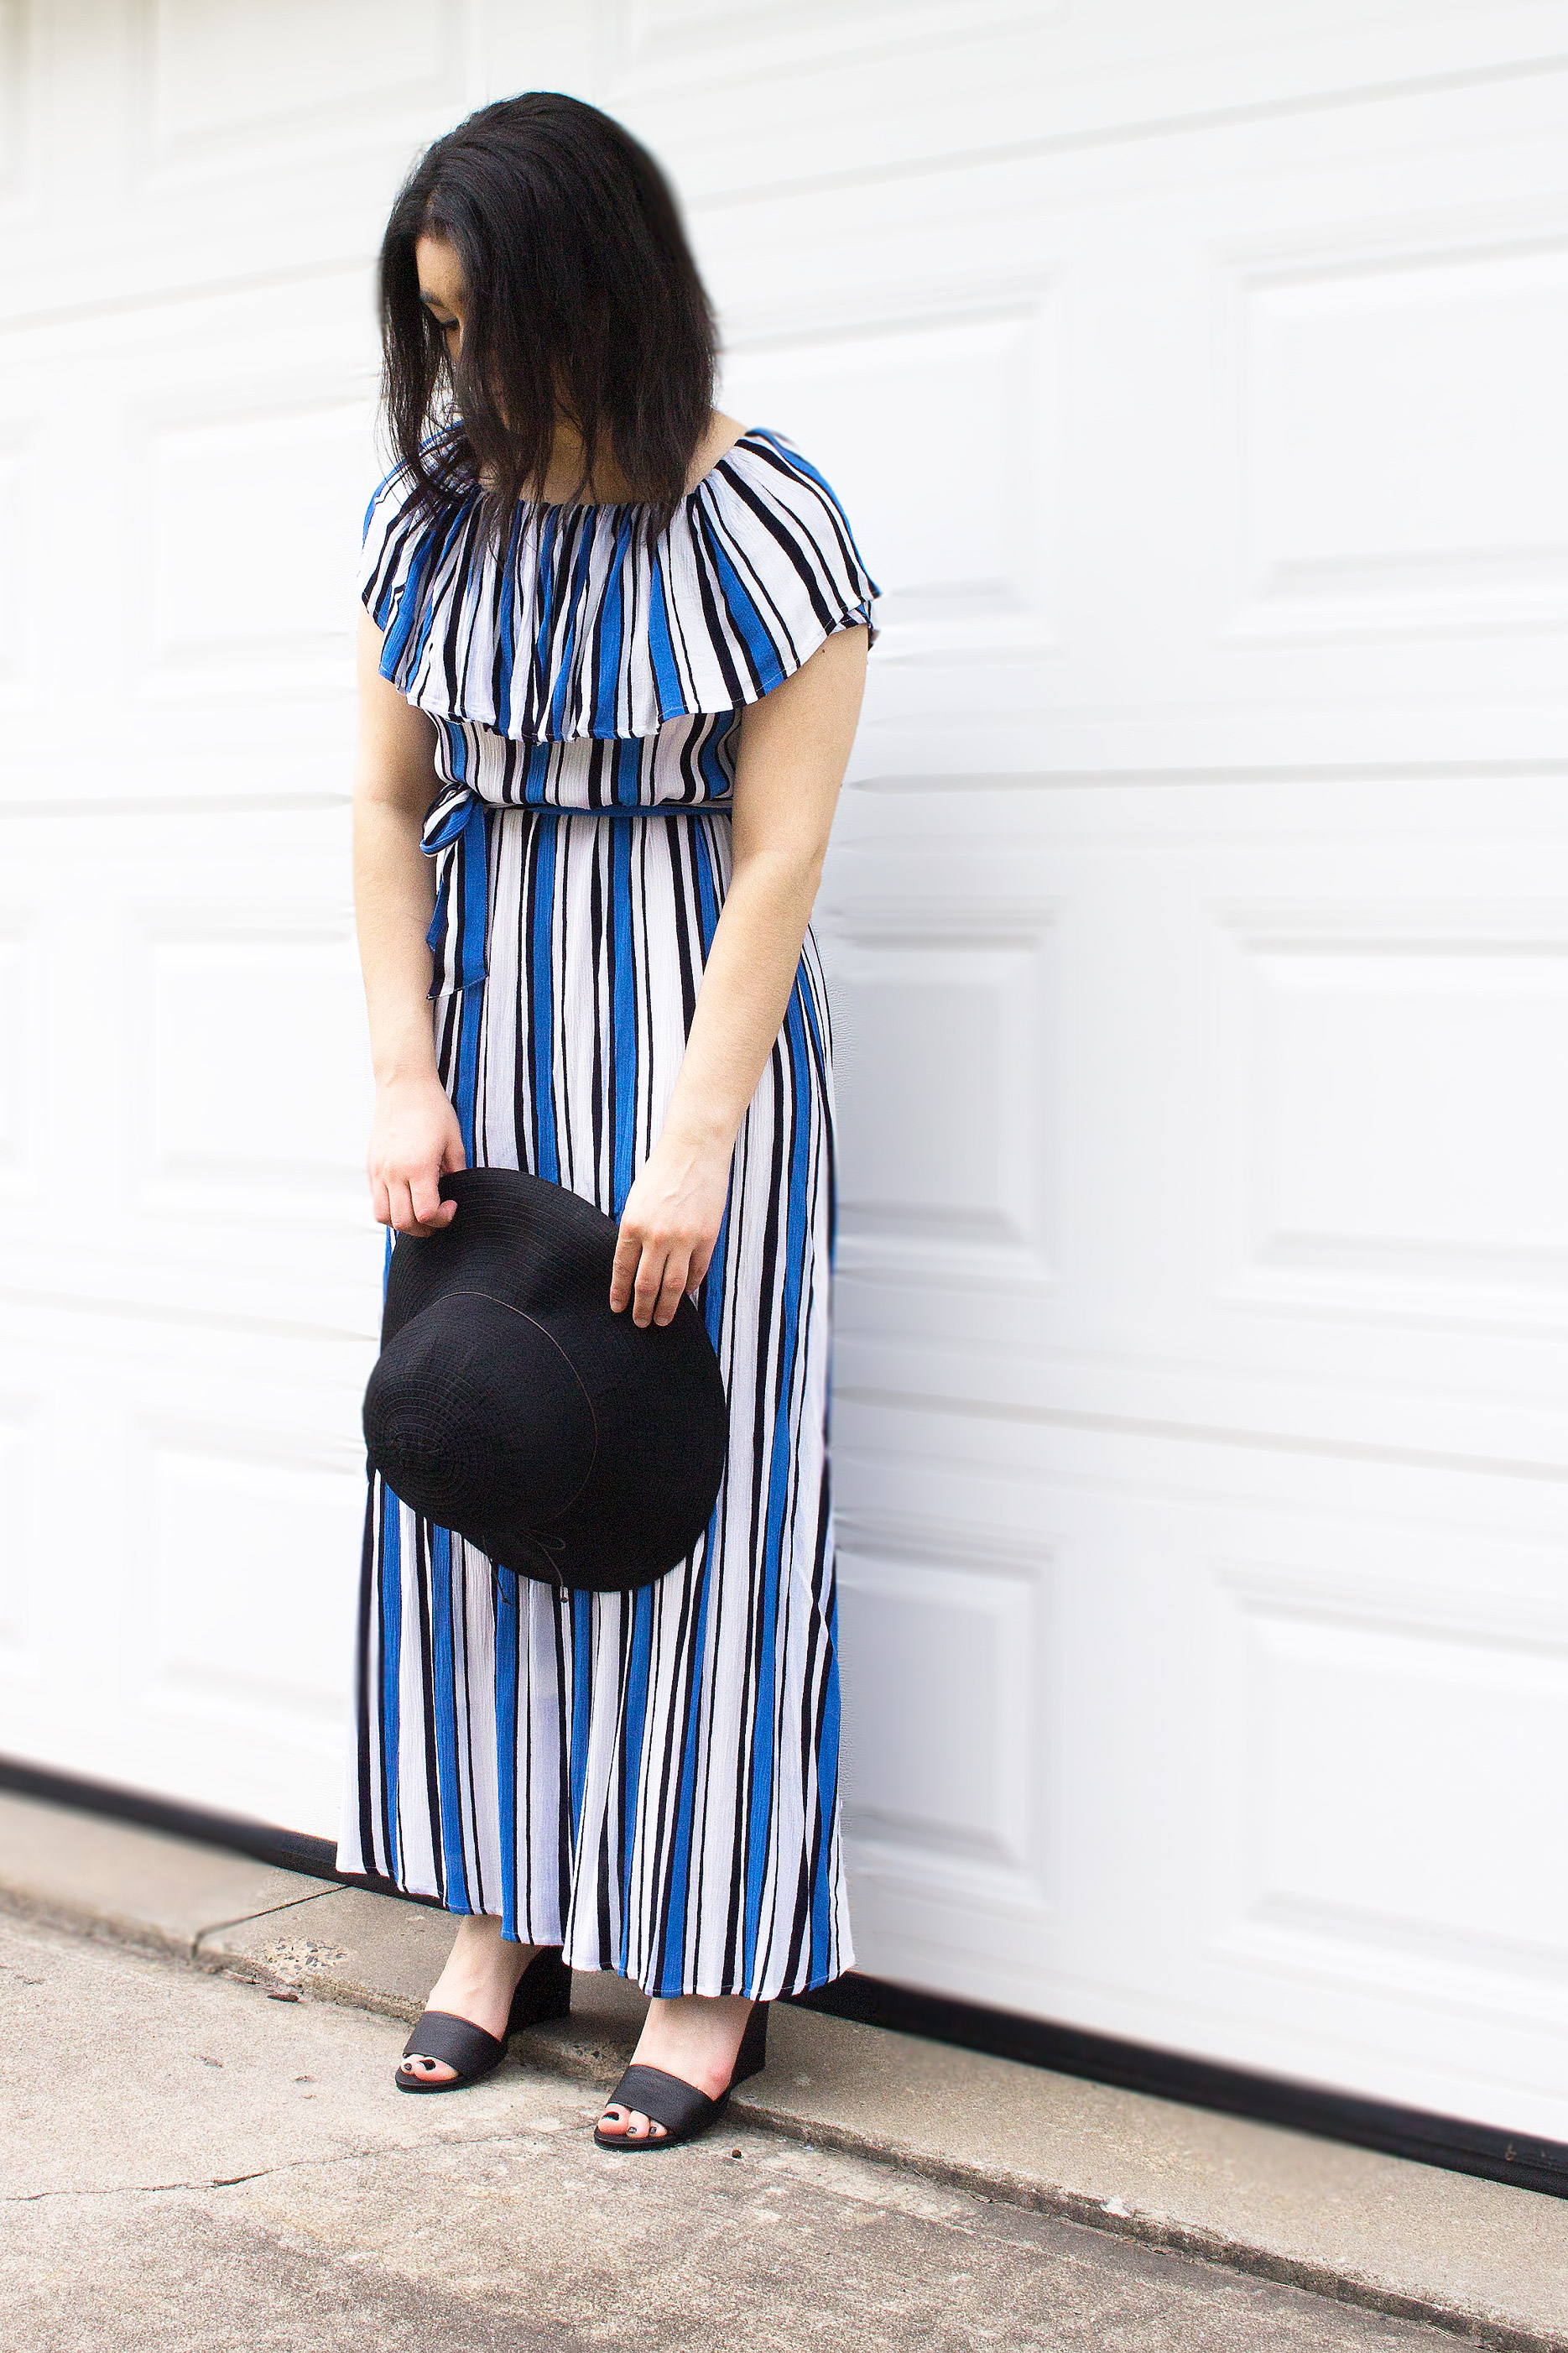 My Favorite Maxi Dress for Under $25